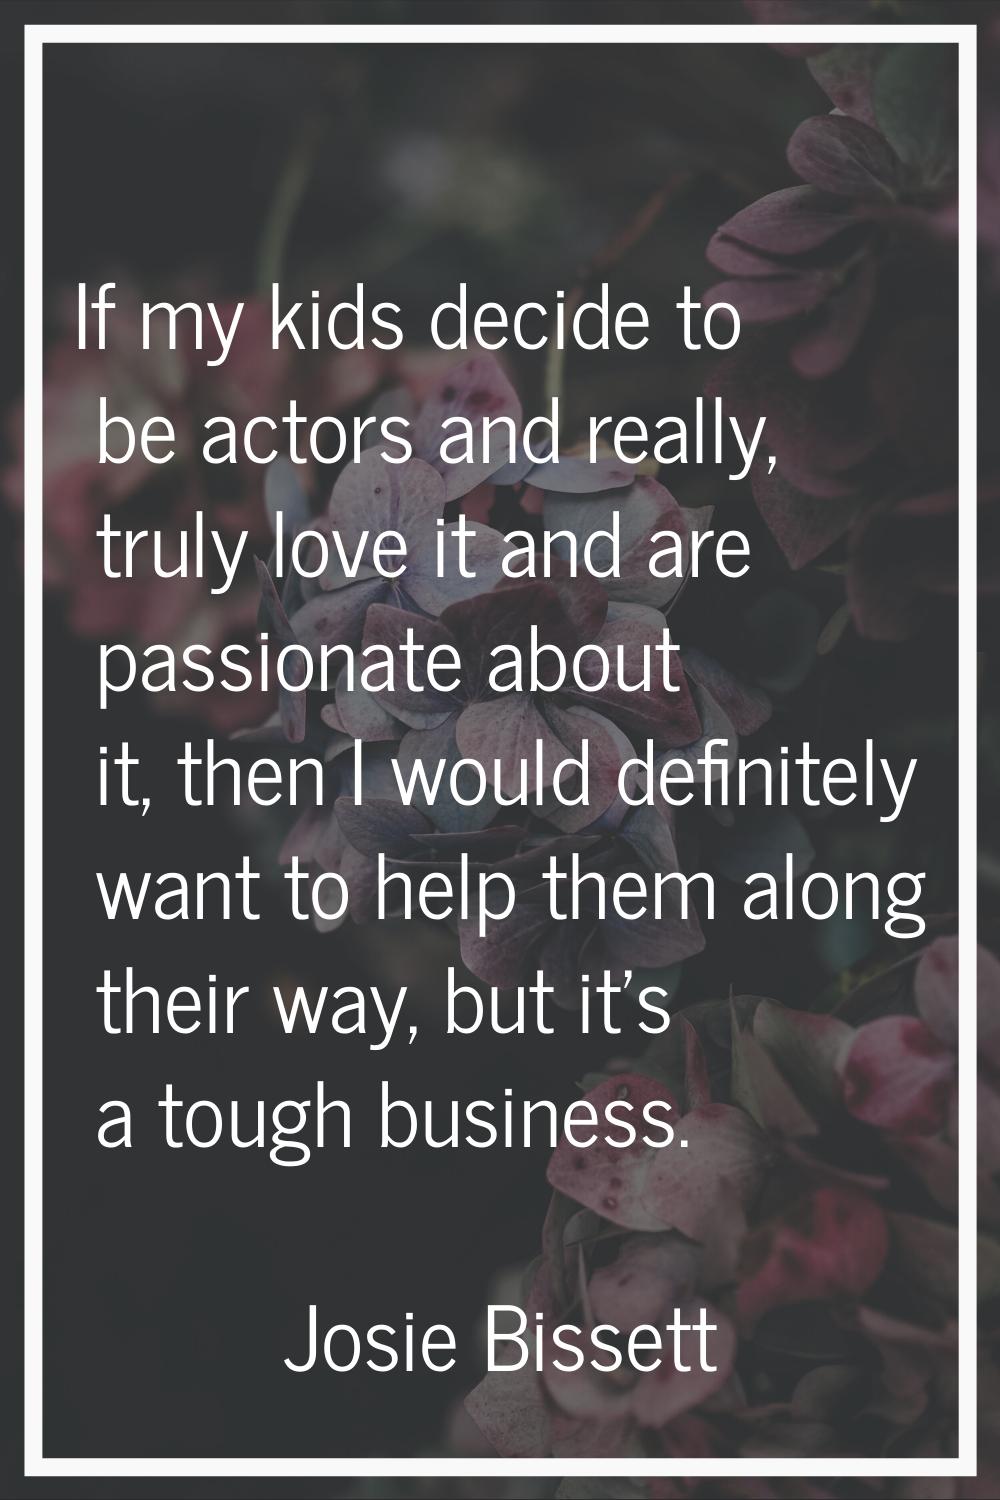 If my kids decide to be actors and really, truly love it and are passionate about it, then I would 